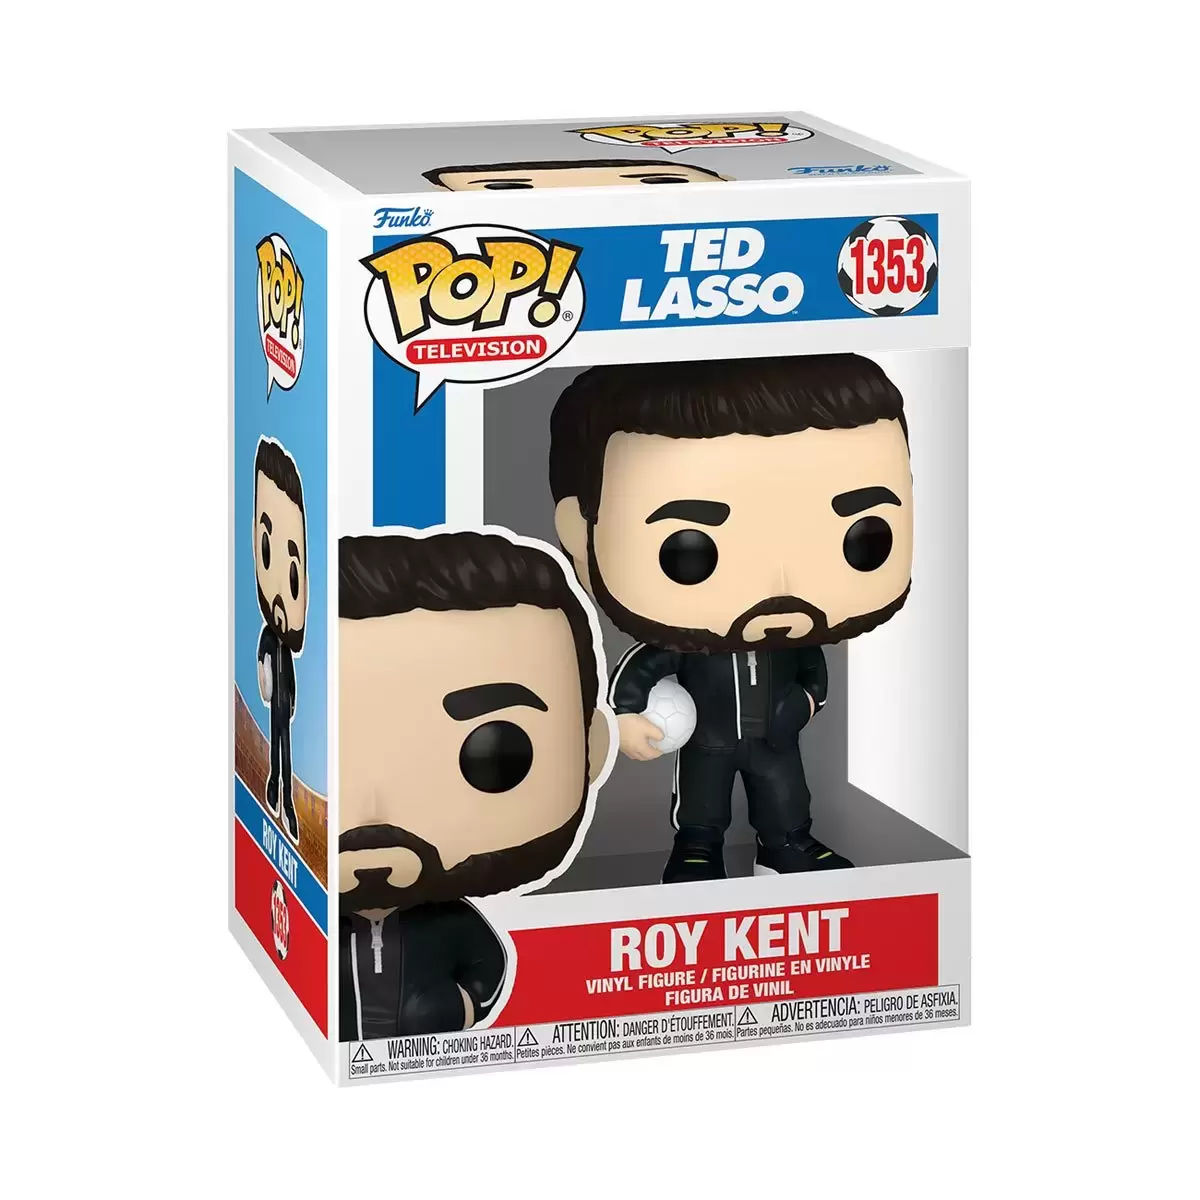 POP! Television - Ted Lasso - Roy Kent